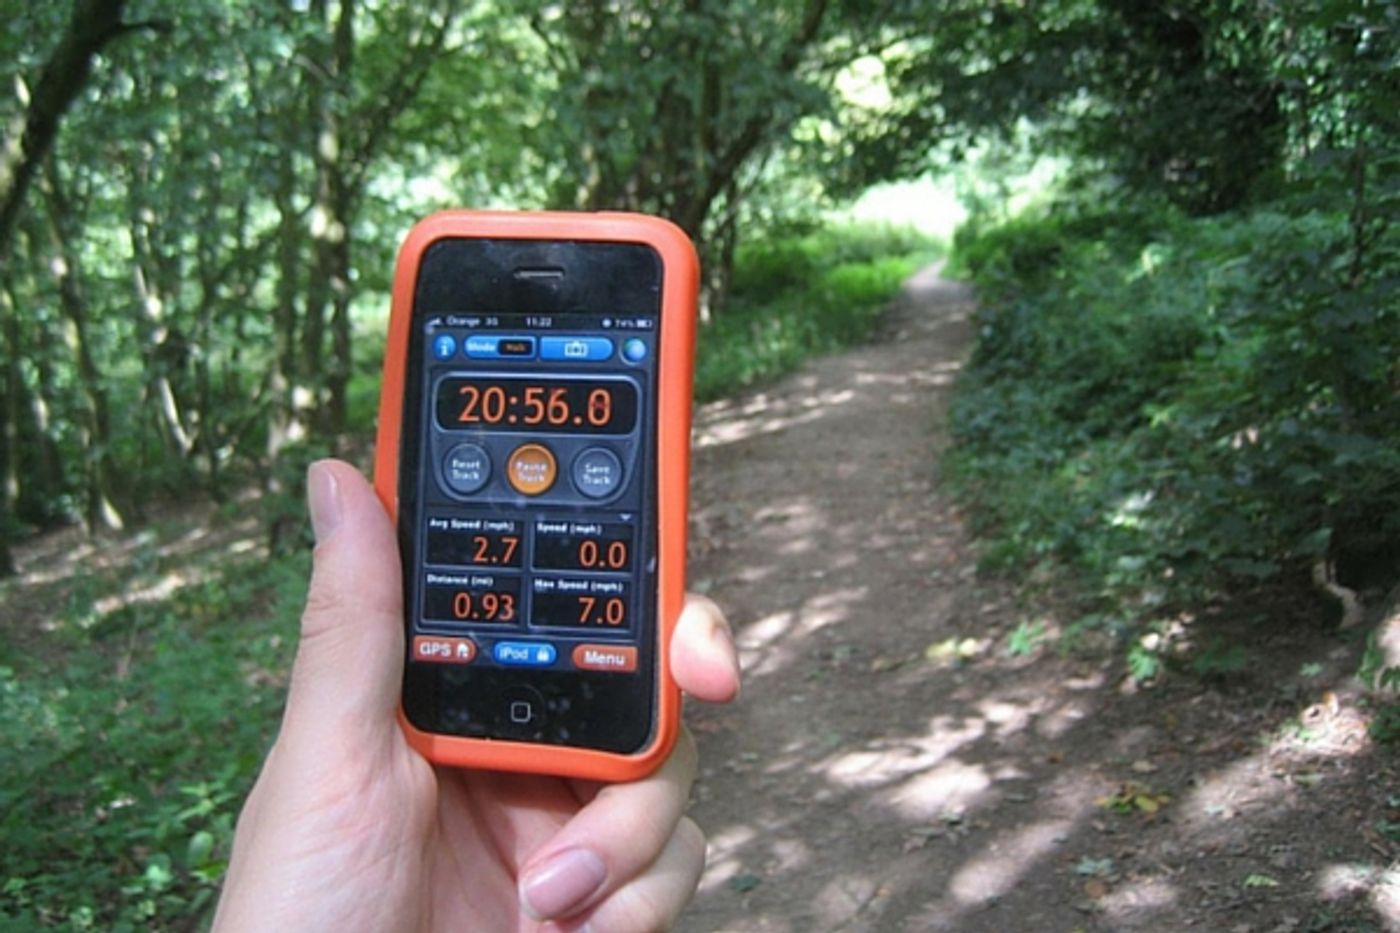 Are GPS devices hindering our abilities to get around?